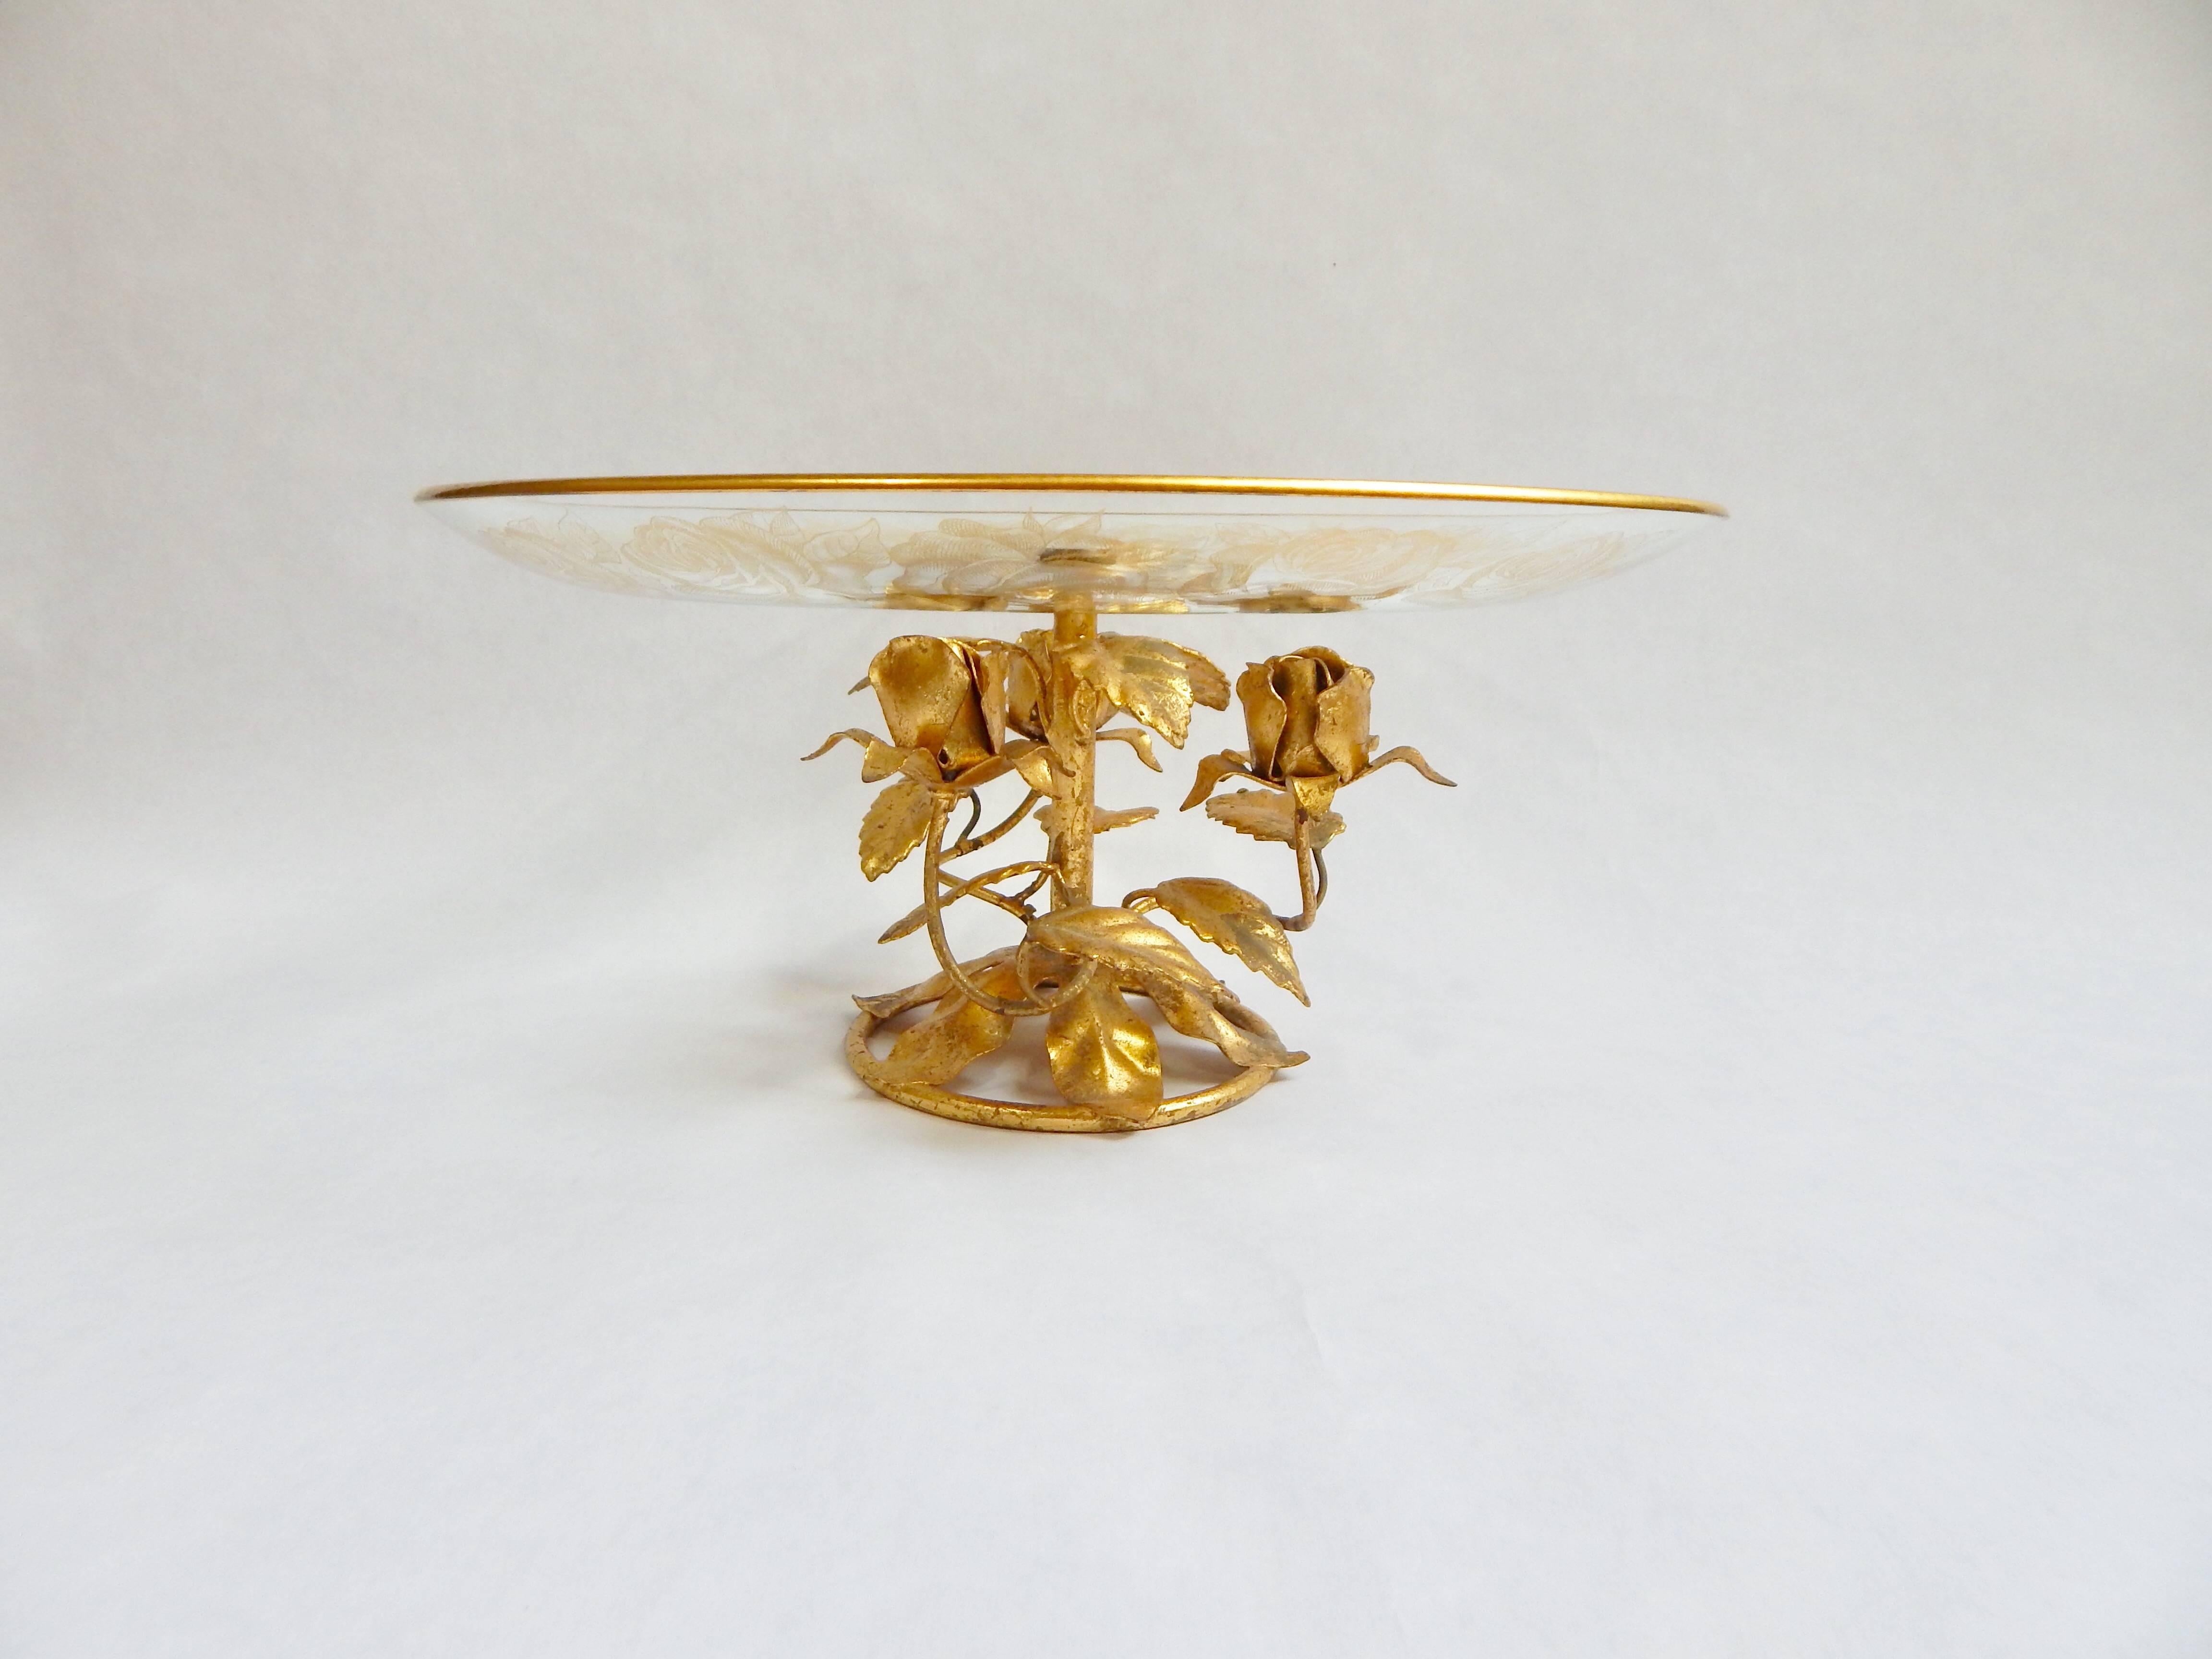 Midcentury 1960s Italian desert stand or plate. Gilt metal floral base with glass plate with gilded trim and floral print. Excellent condition.